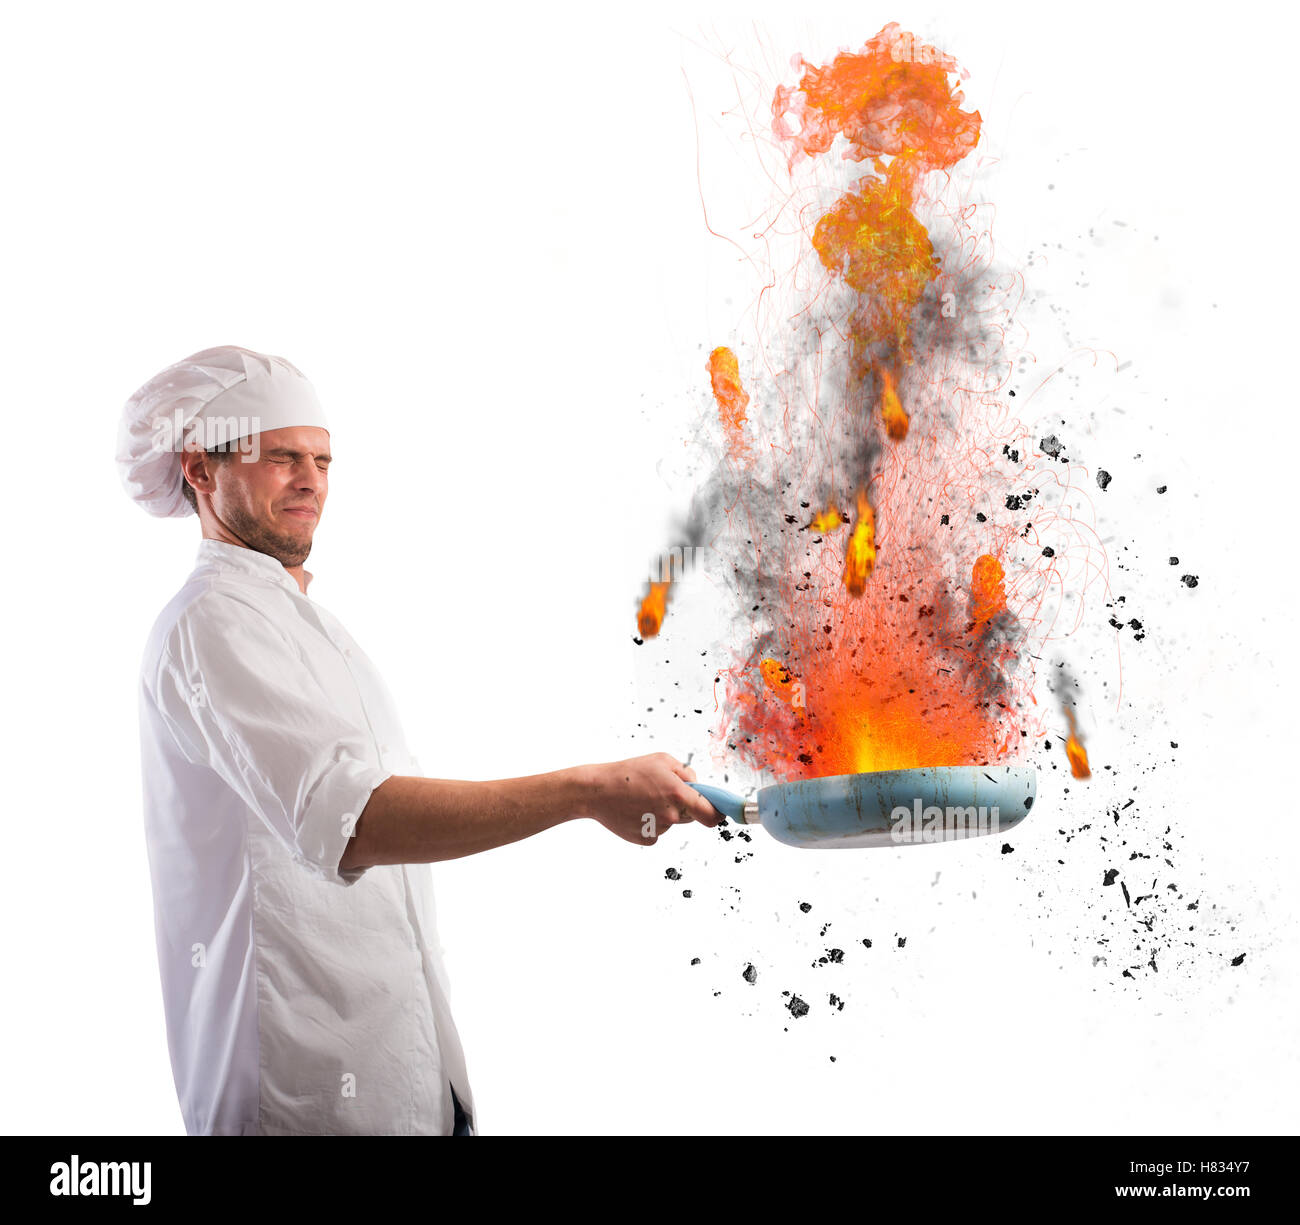 Cook troublemaker Stock Photo